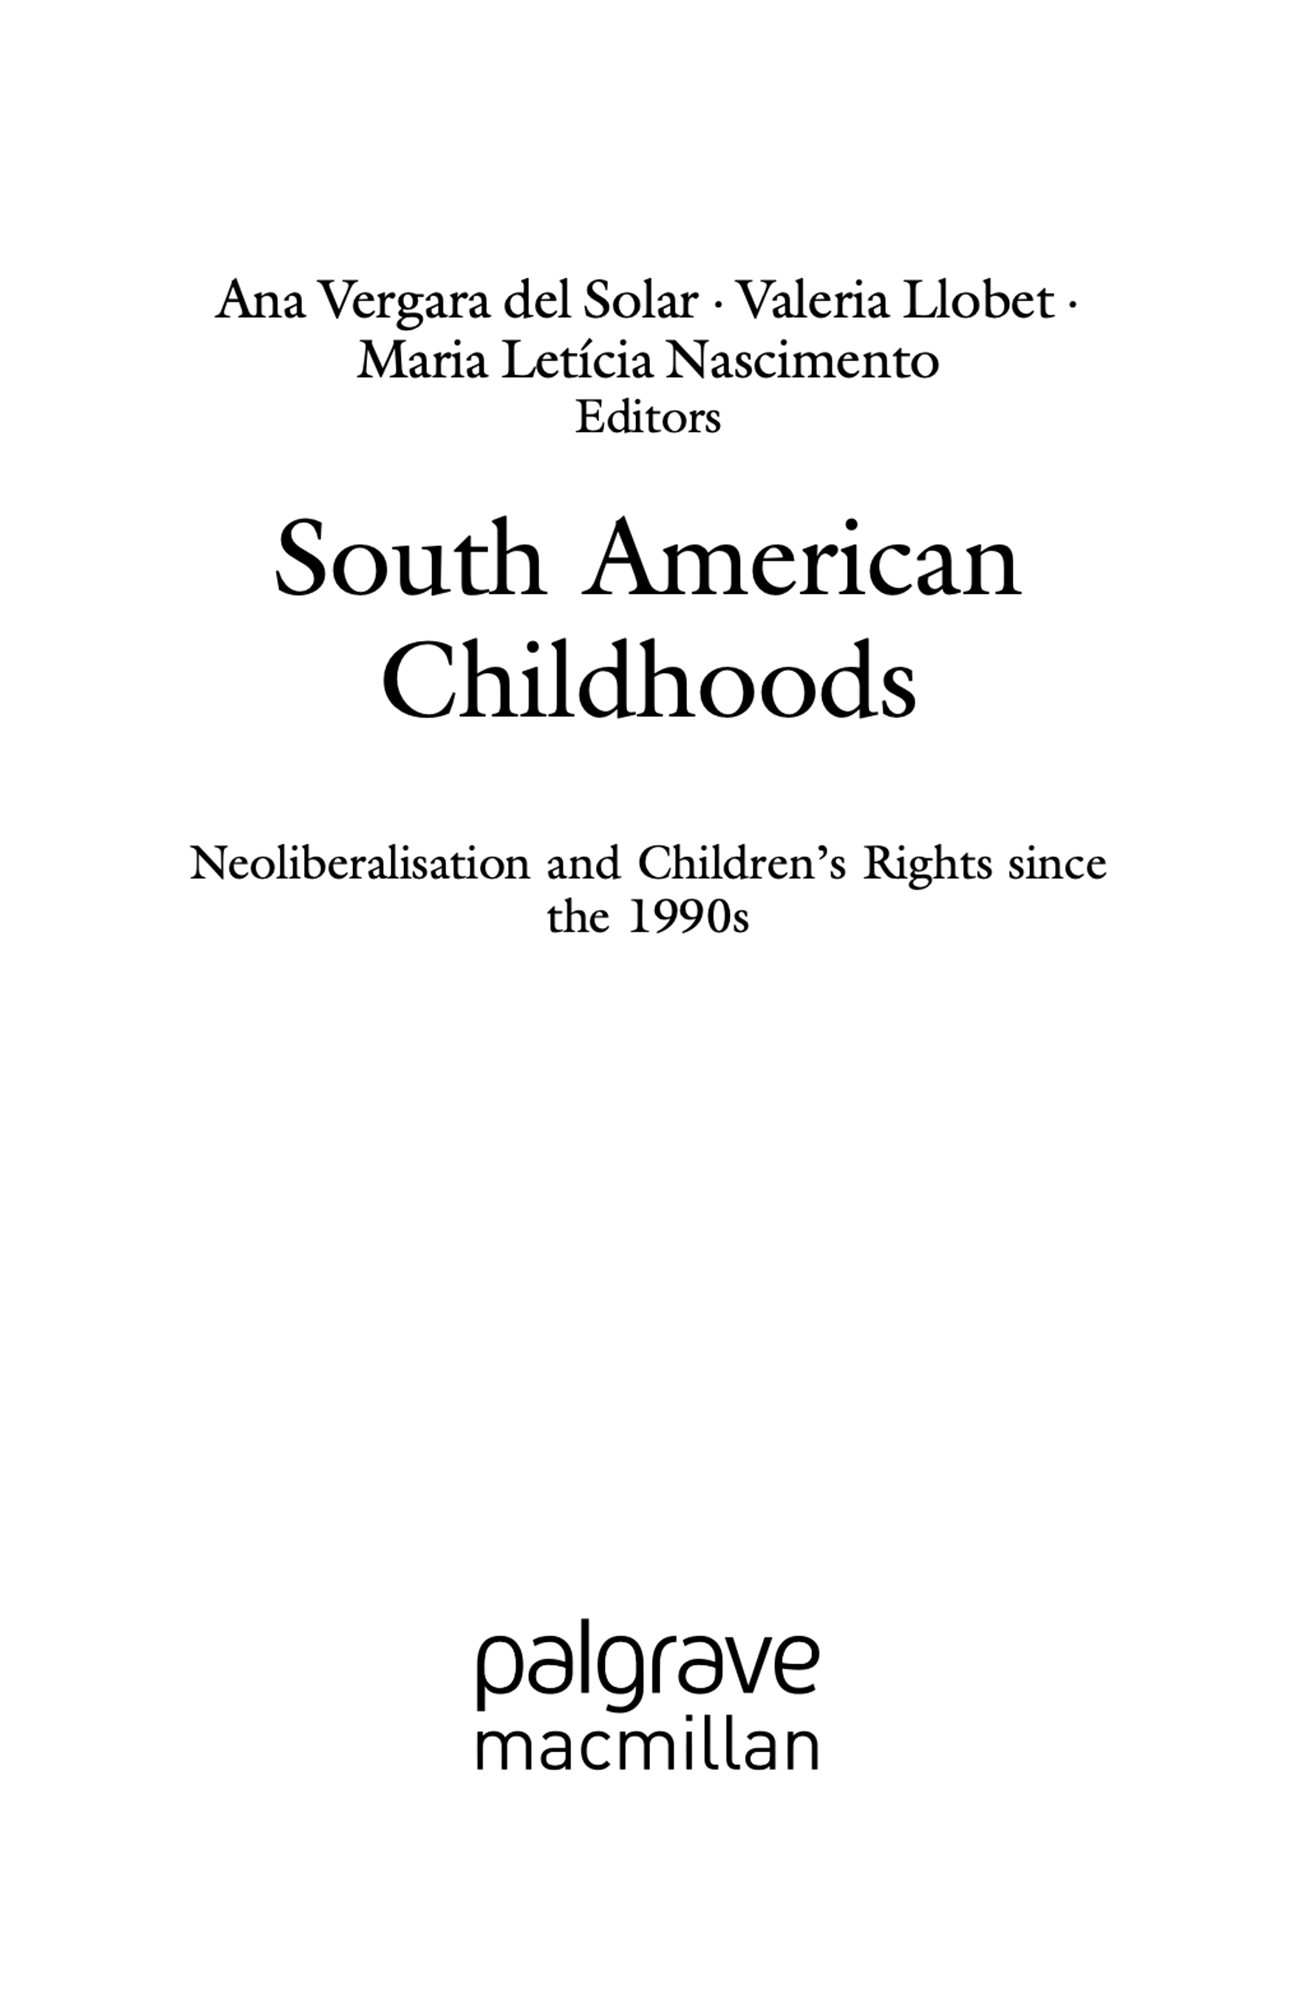 South_American_Childhoods_I